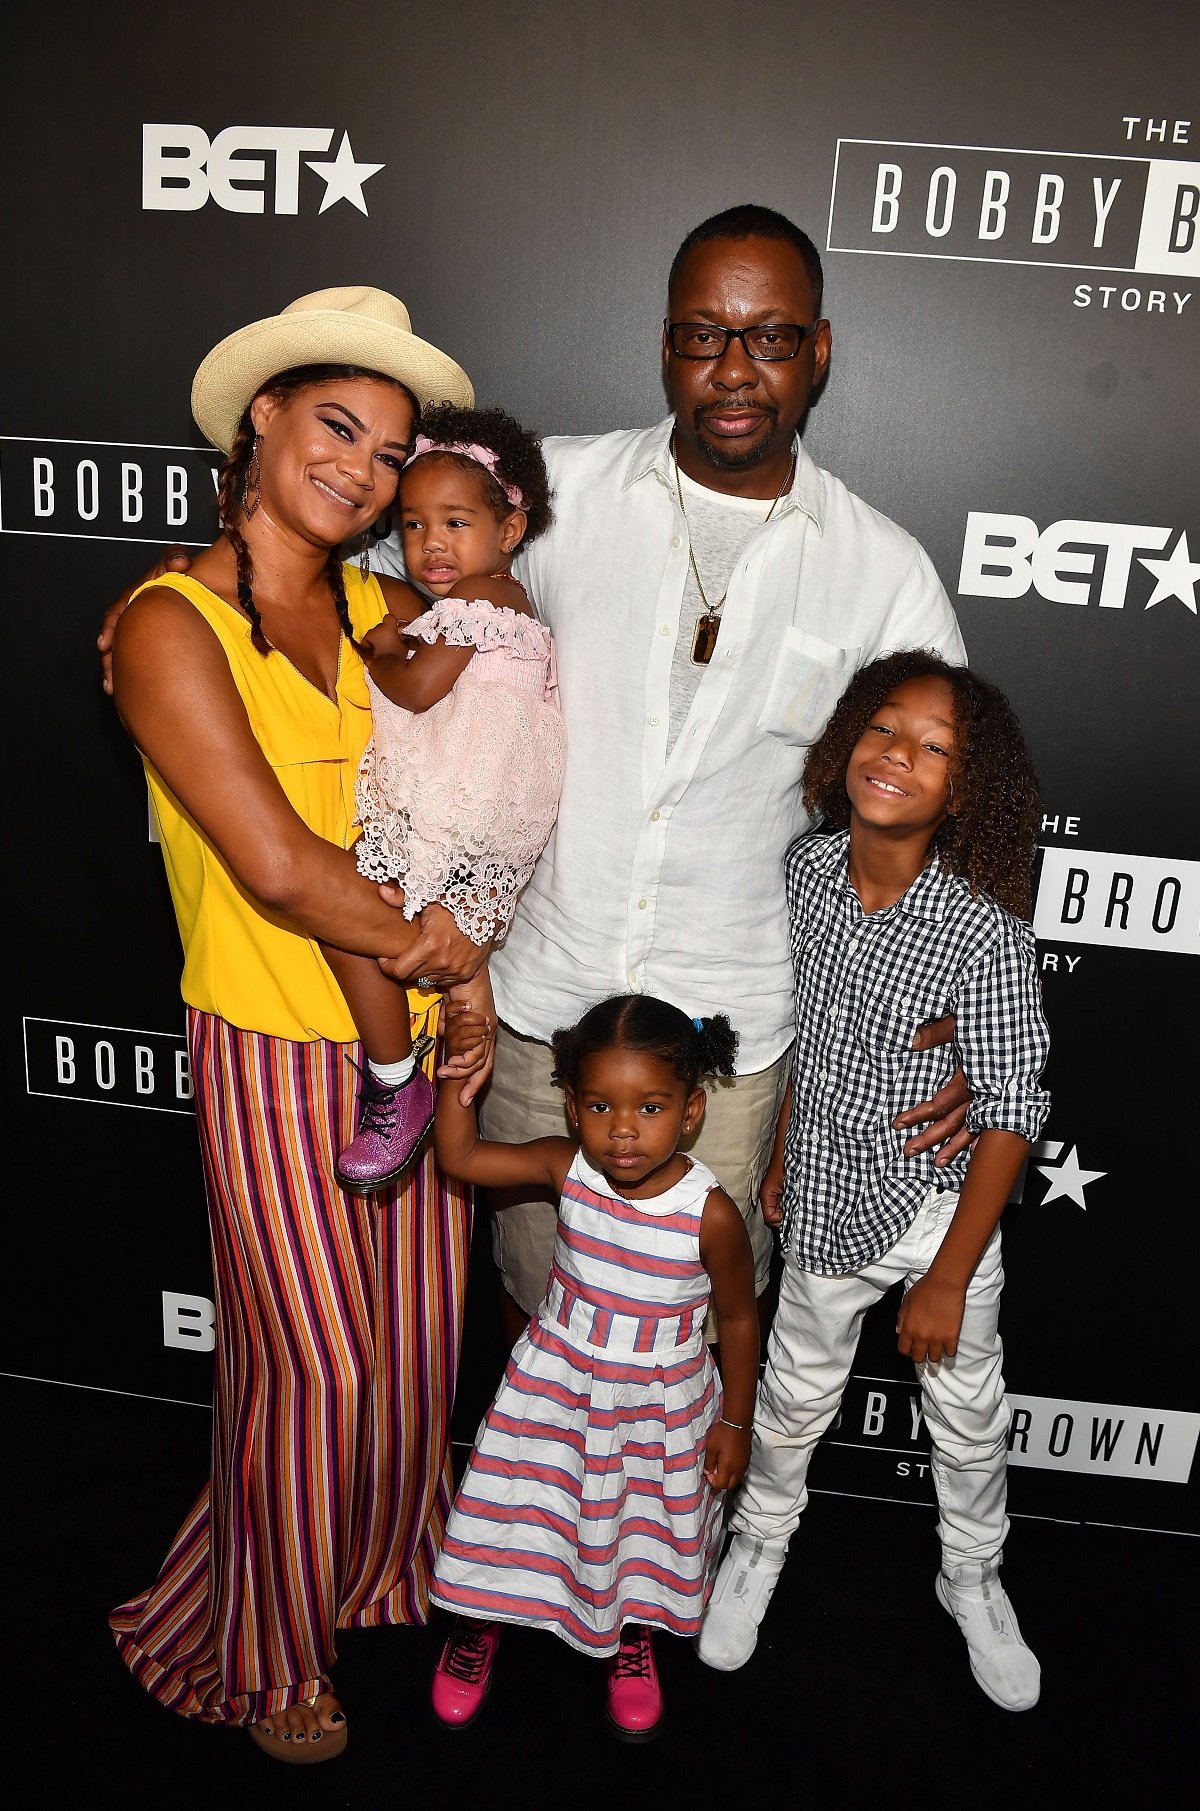 Who Are the Mothers of Bobby Brown's 7 Children?